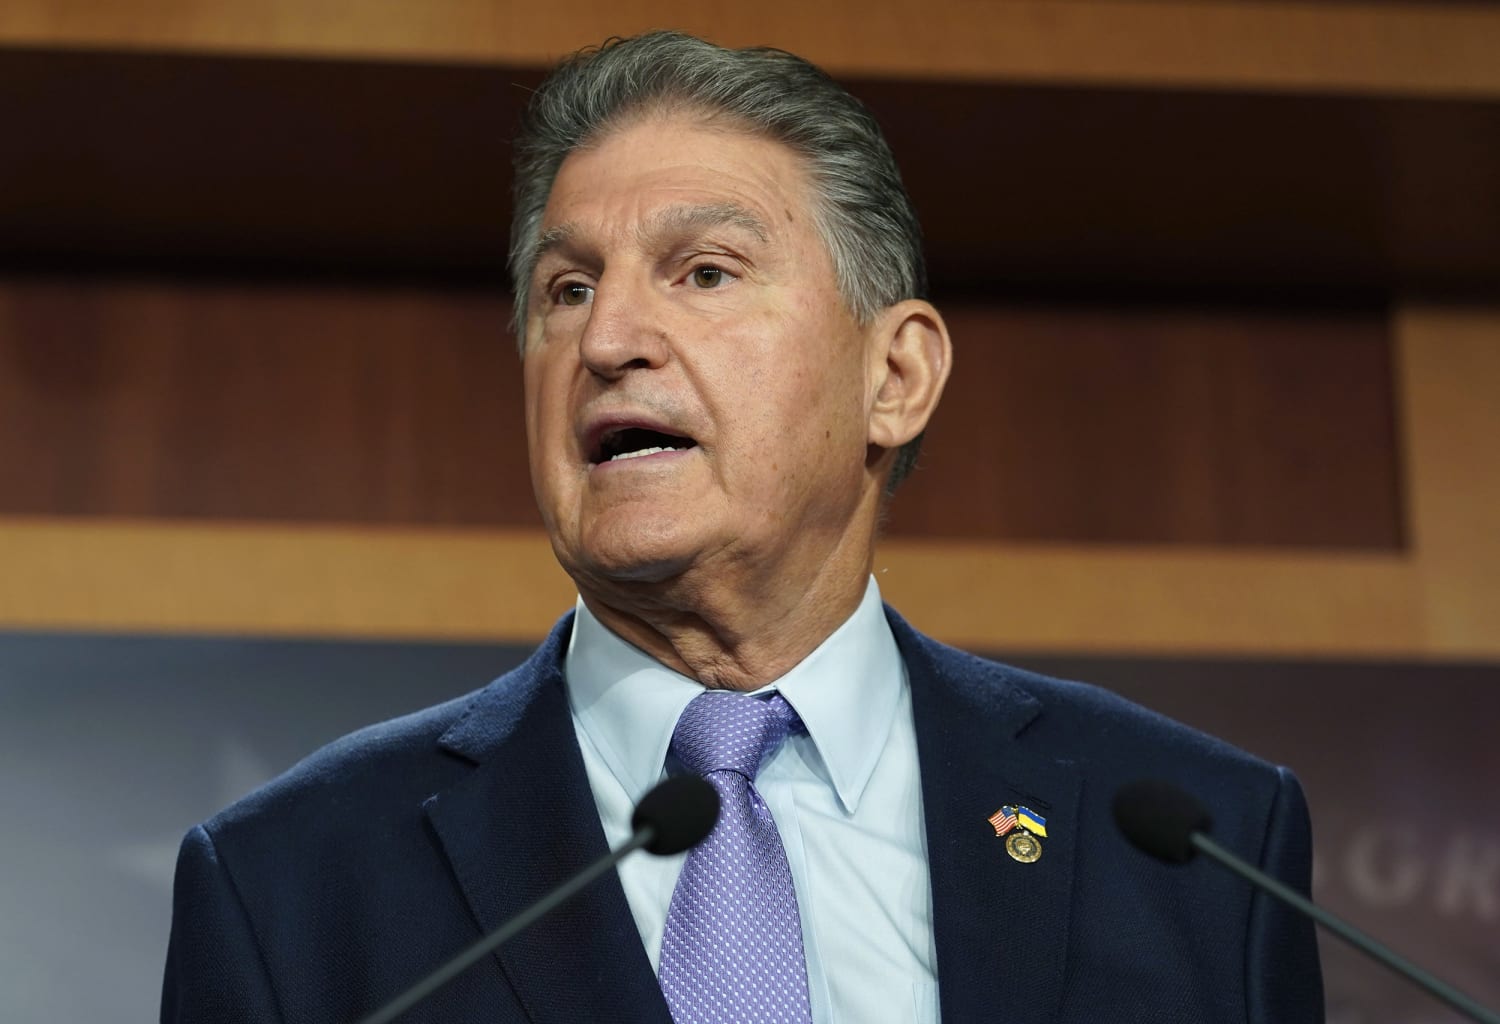 Manchin threatens to back repeal of major climate and tax measure over Biden’s energy policies